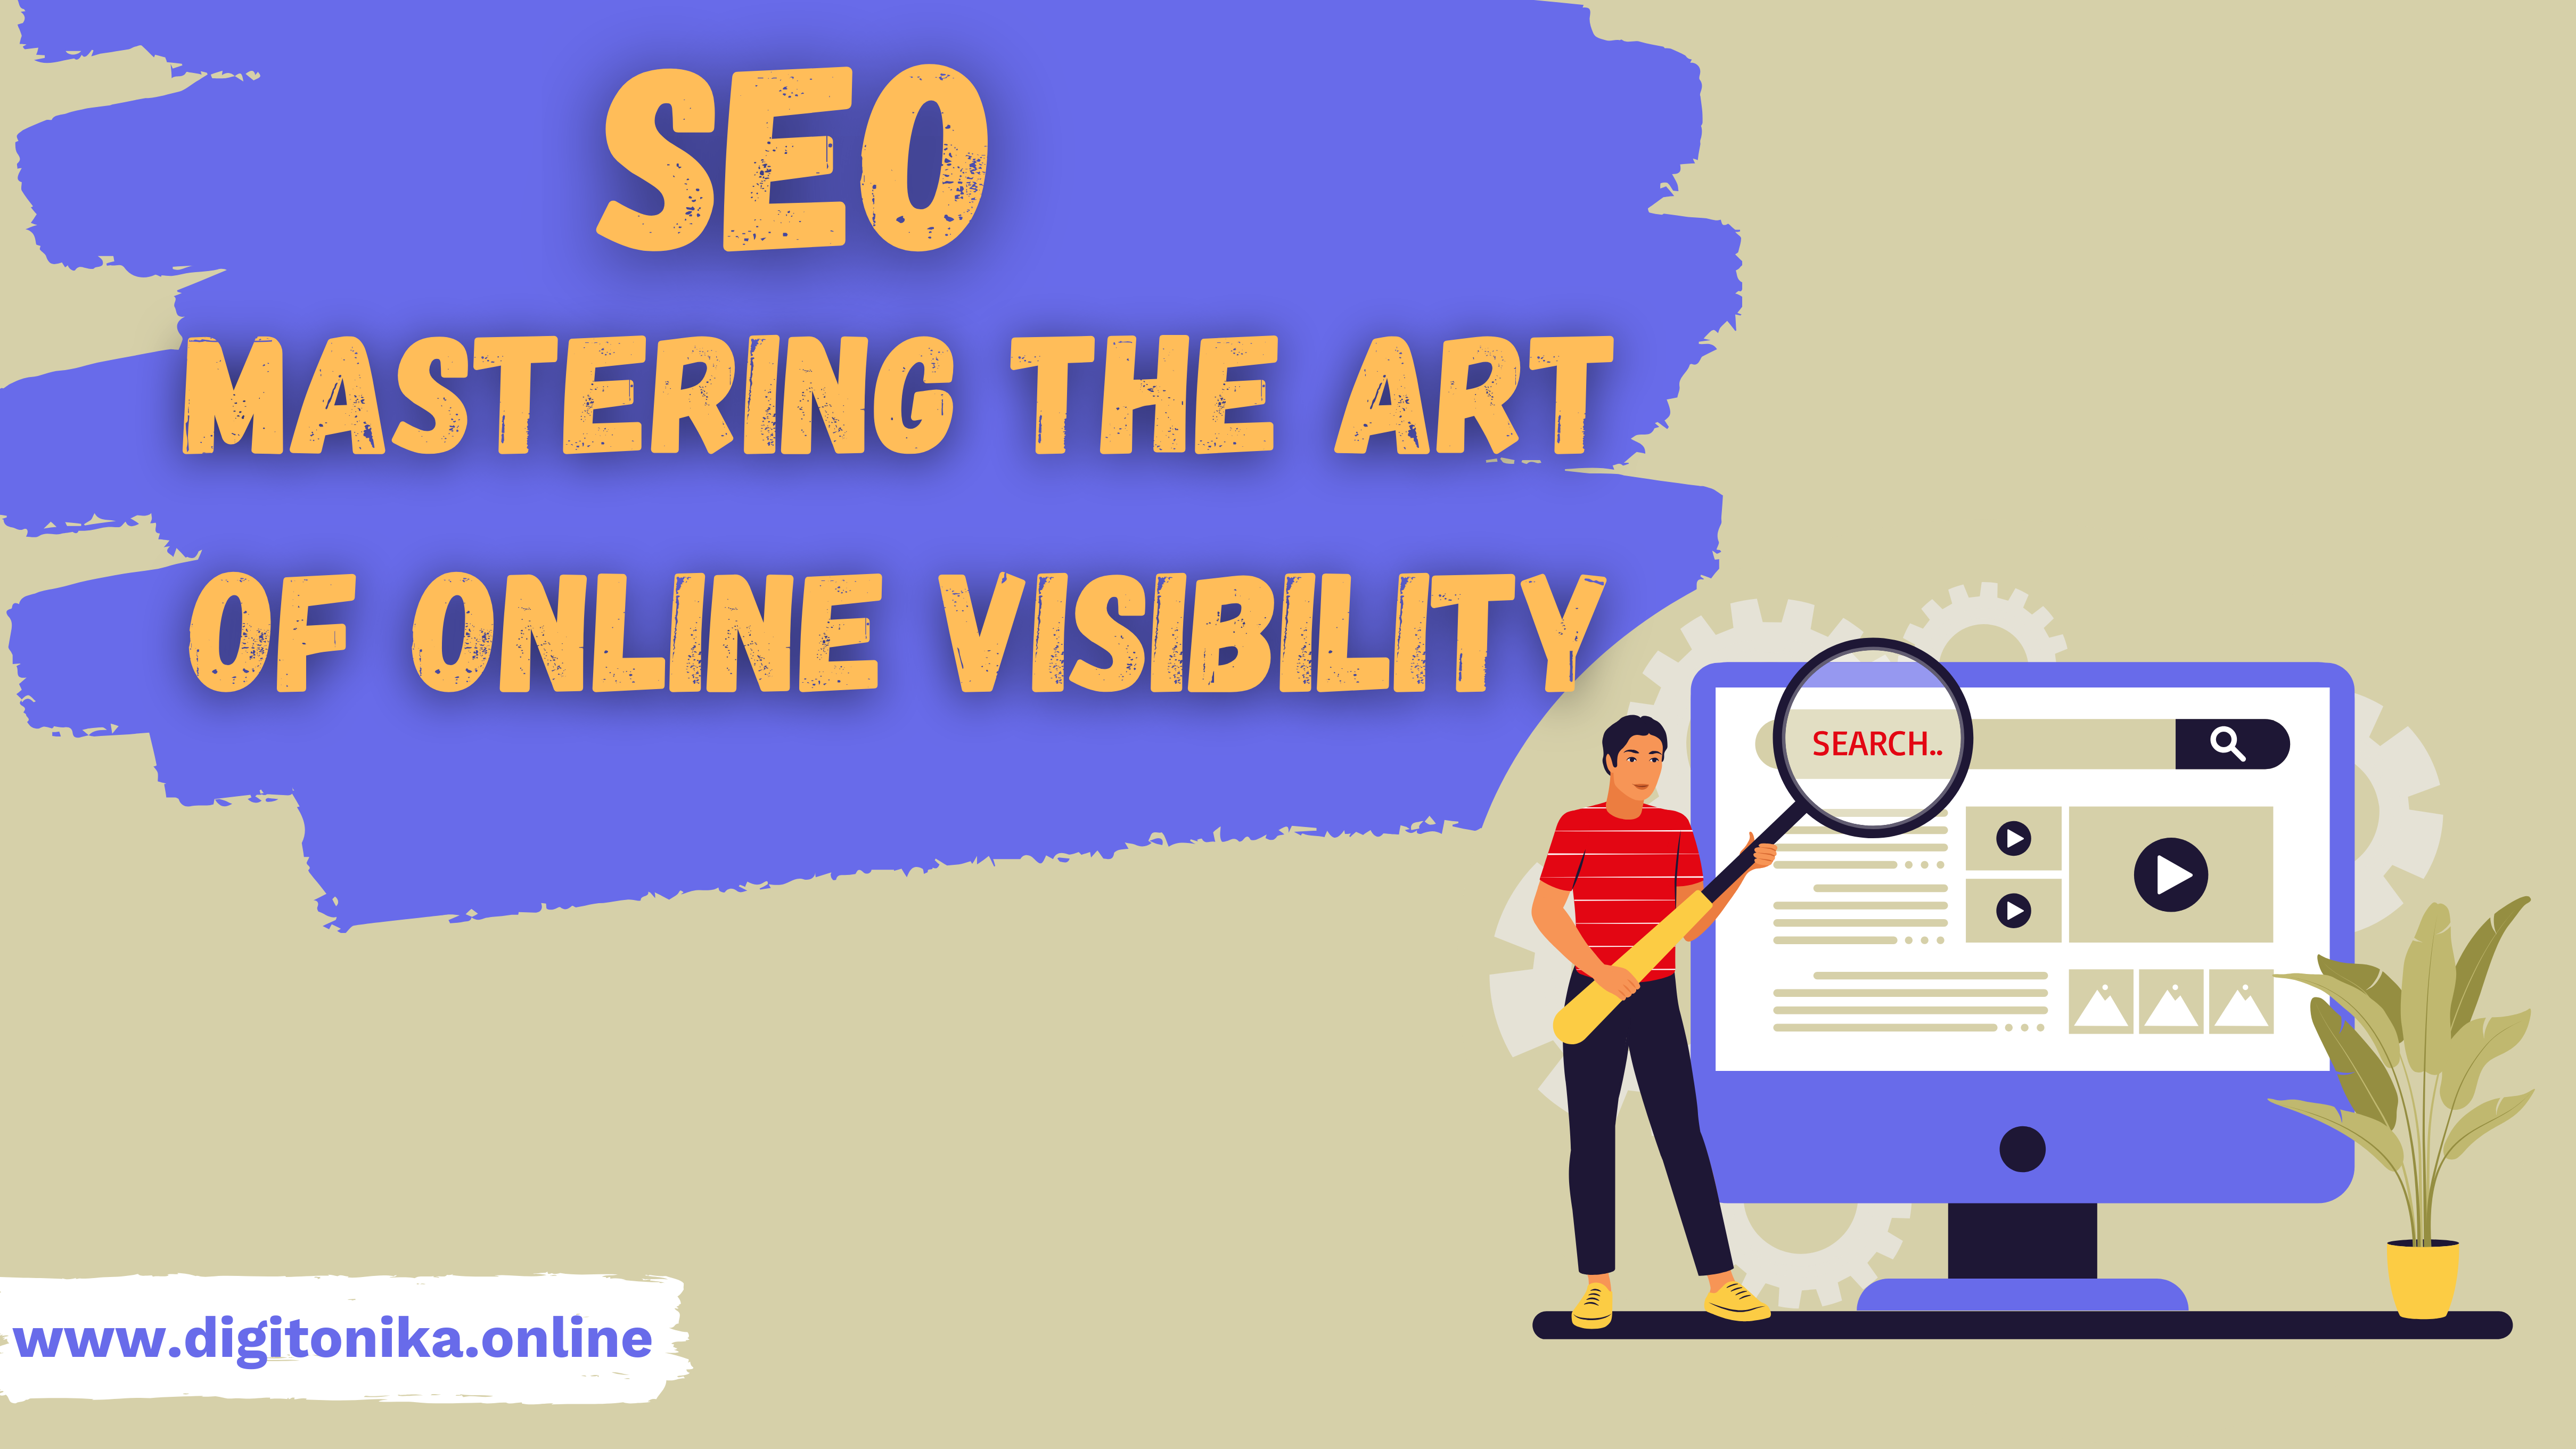 SEO: Mastering the Art of Online Visibility